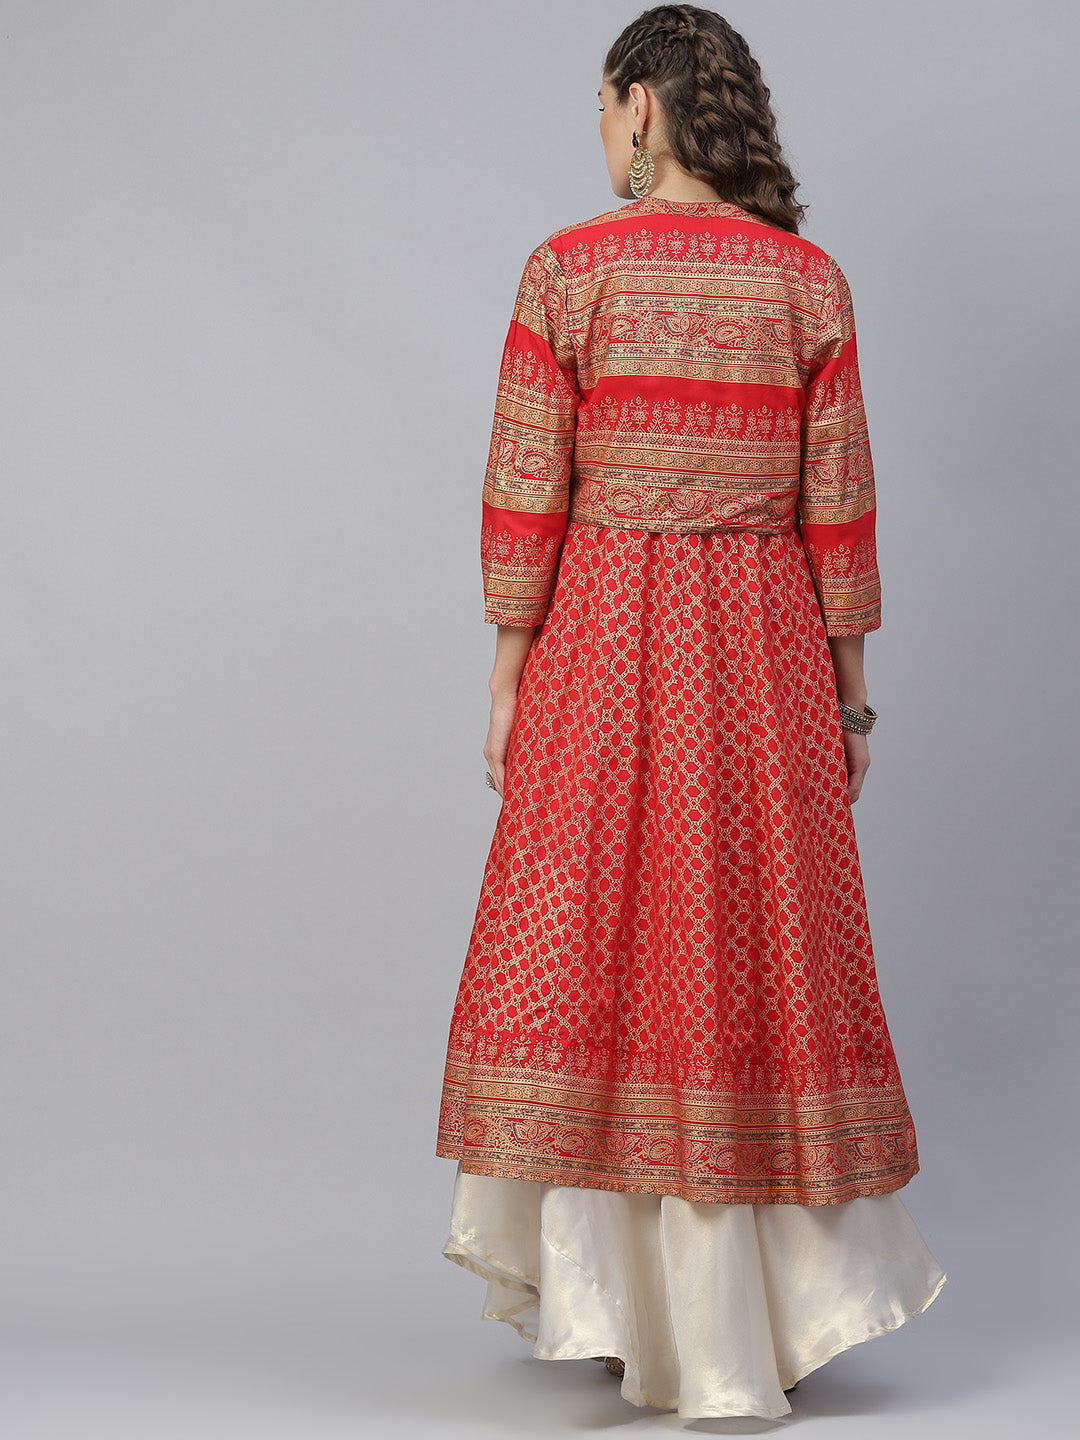 Women's Red Gold Print Anarkali With Jacket - Aks